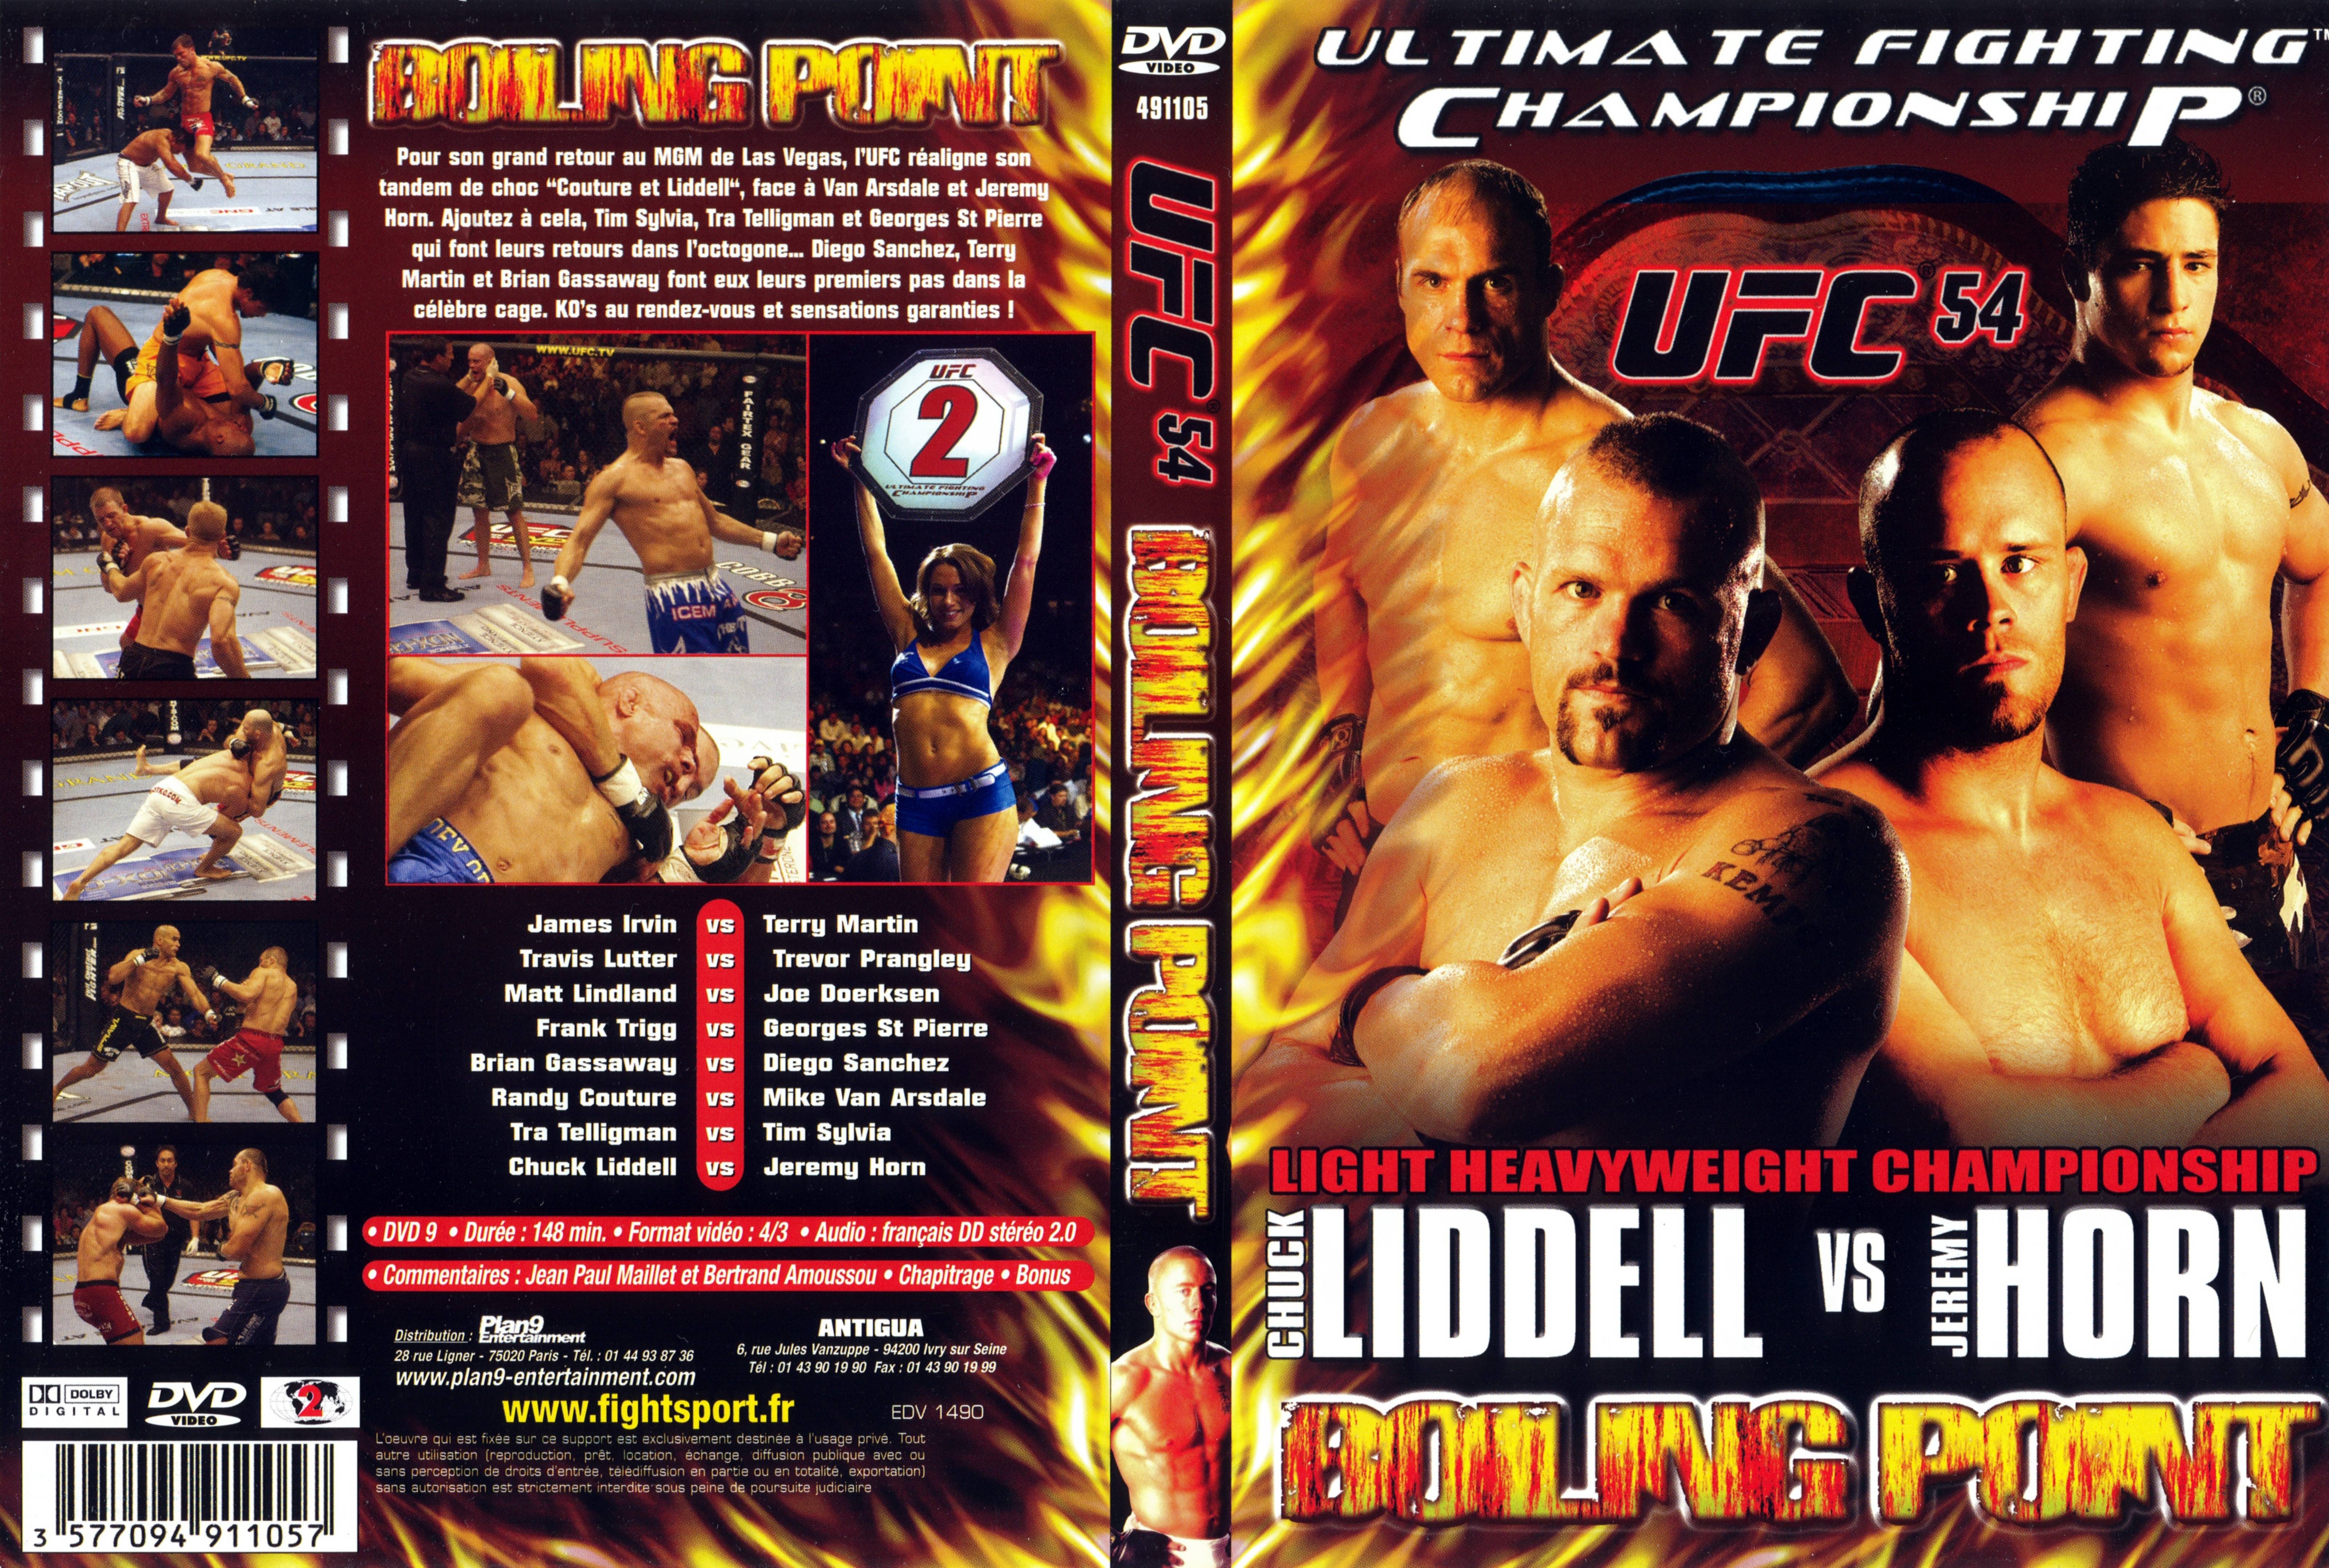 Jaquette DVD Ufc 54 boling point